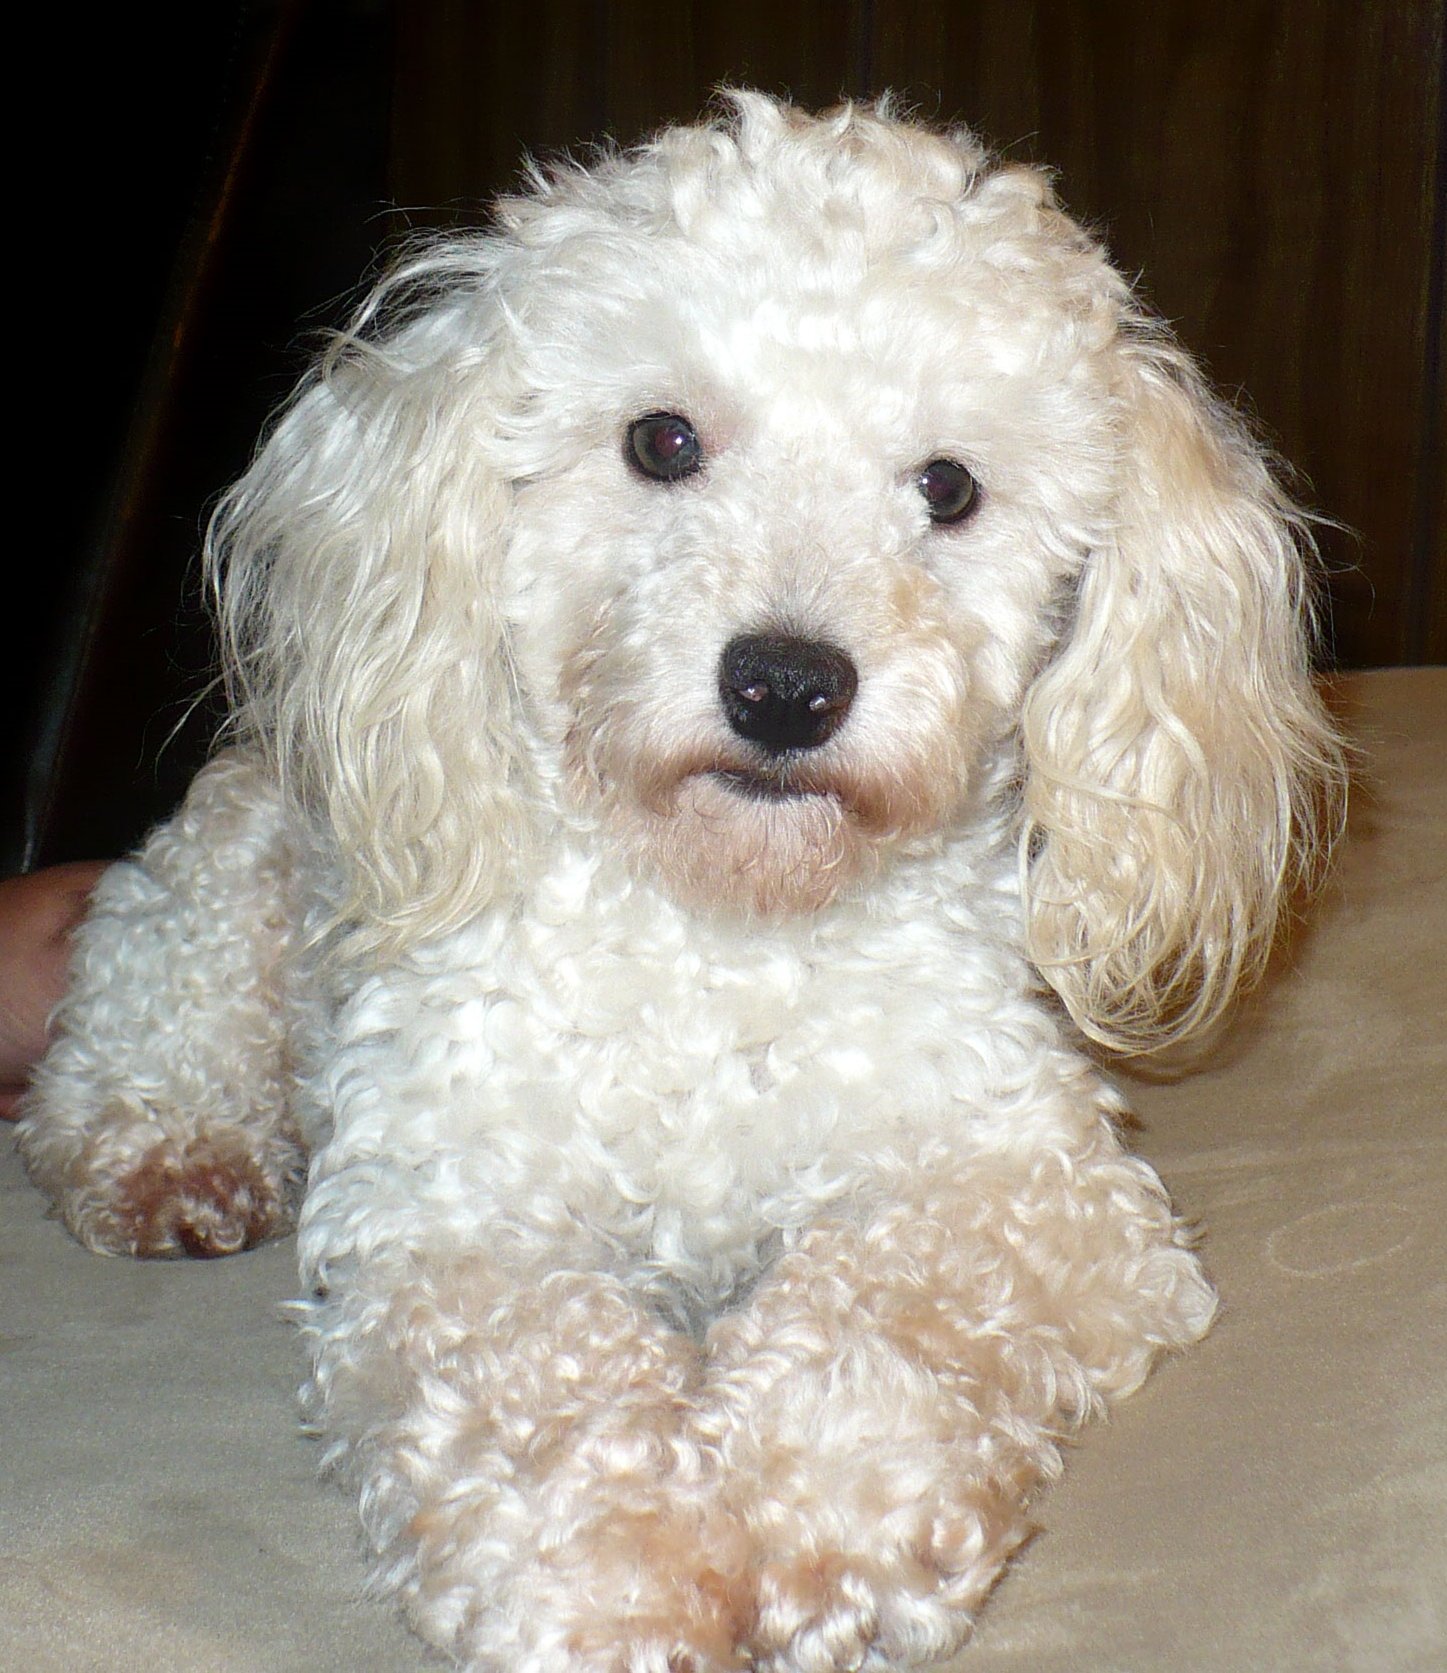 Poodle Google image from http://all-puppies.com/12-adorable-white-poodle-puppy-pictures.html